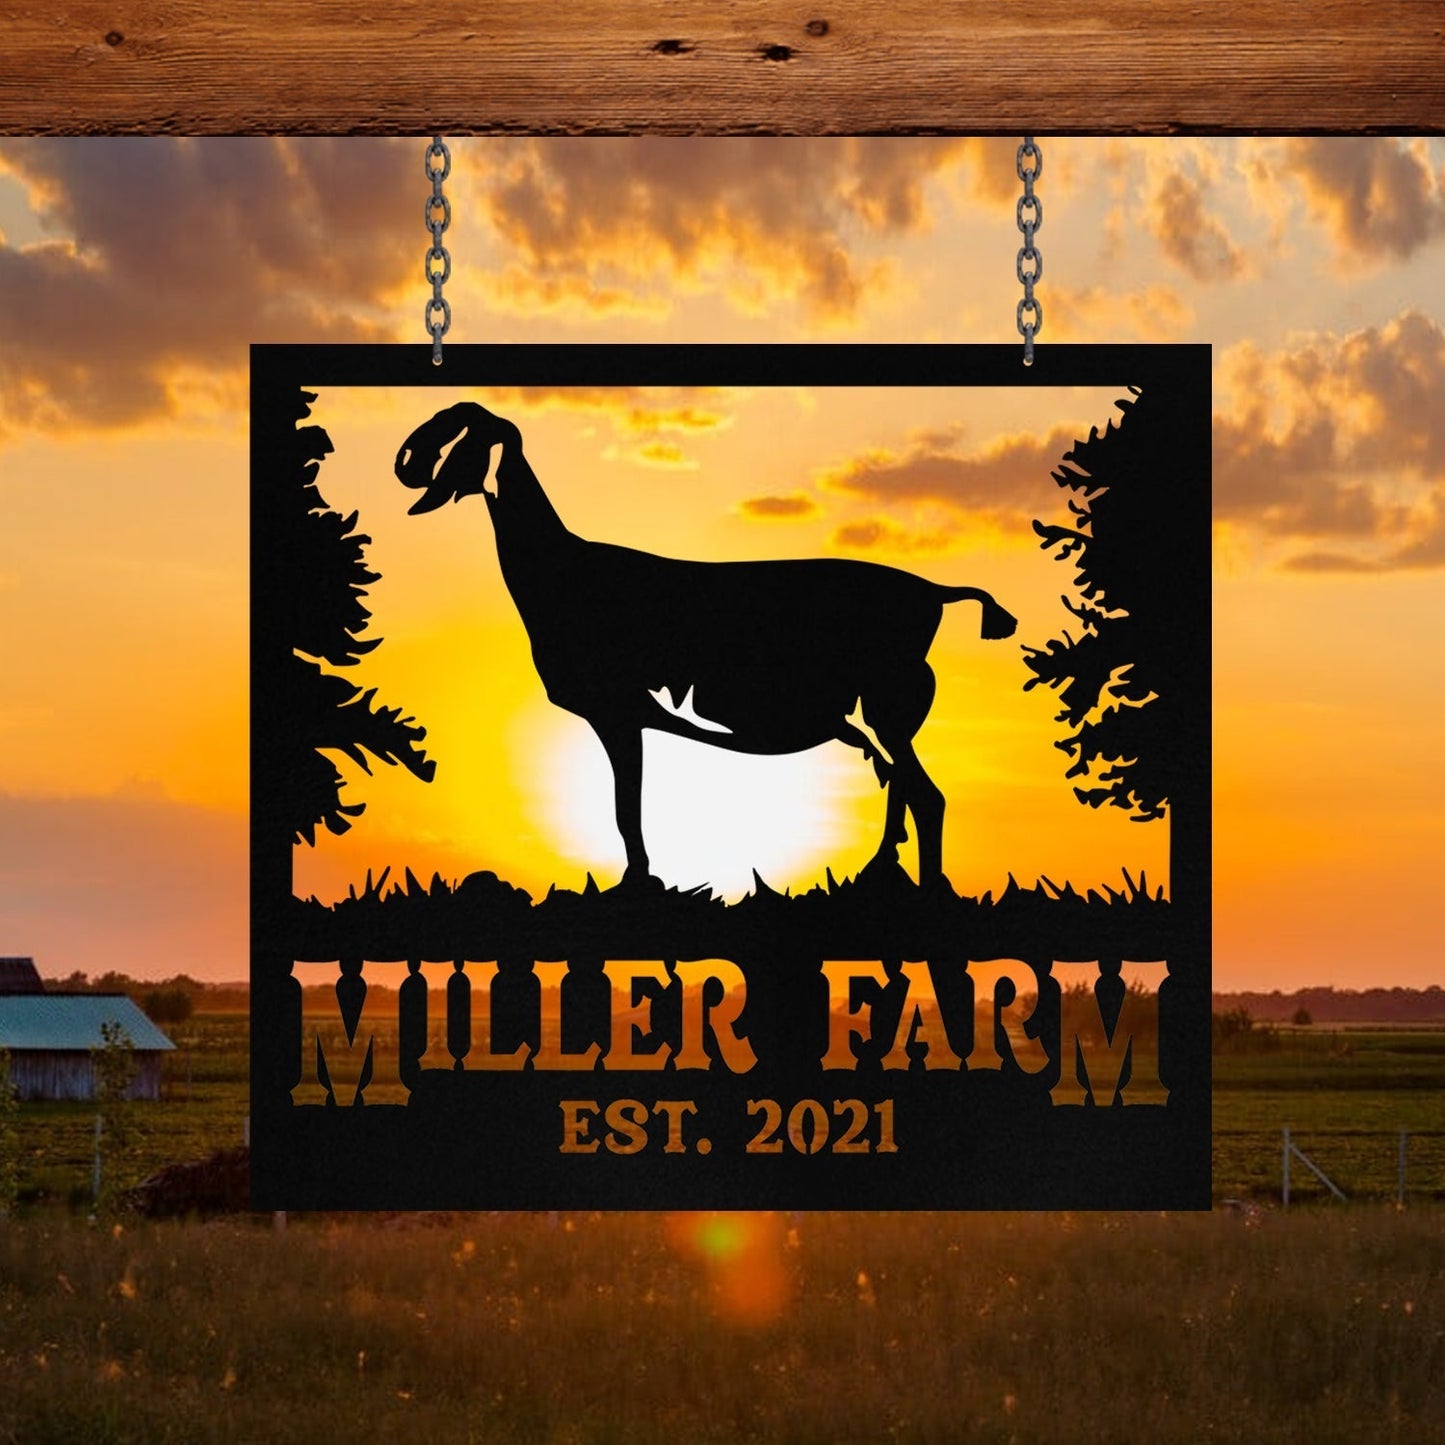 Personalized Metal Farm Sign Anglo Nubian Goat Monogram Custom Outdoor Farmhouse Front Gate Ranch Wall Decor Art Gift